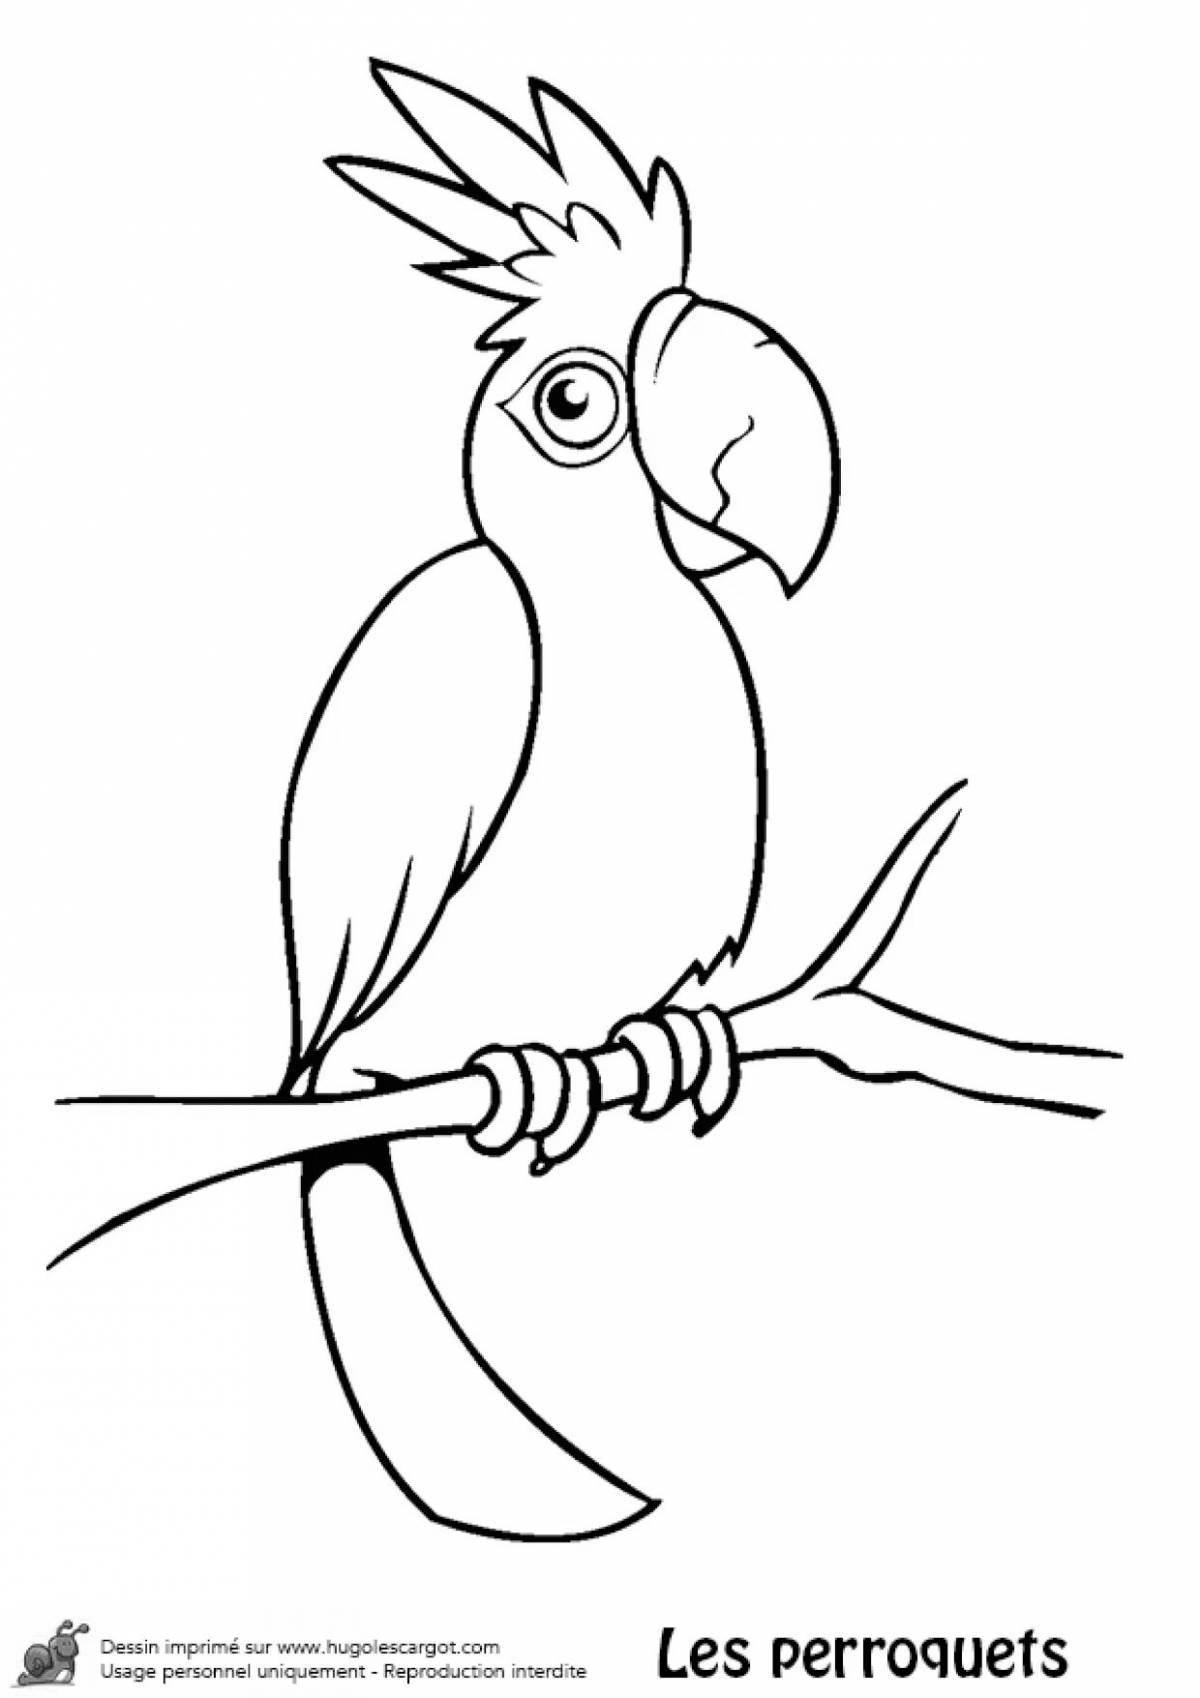 Coloring book magic parrot for children 6-7 years old